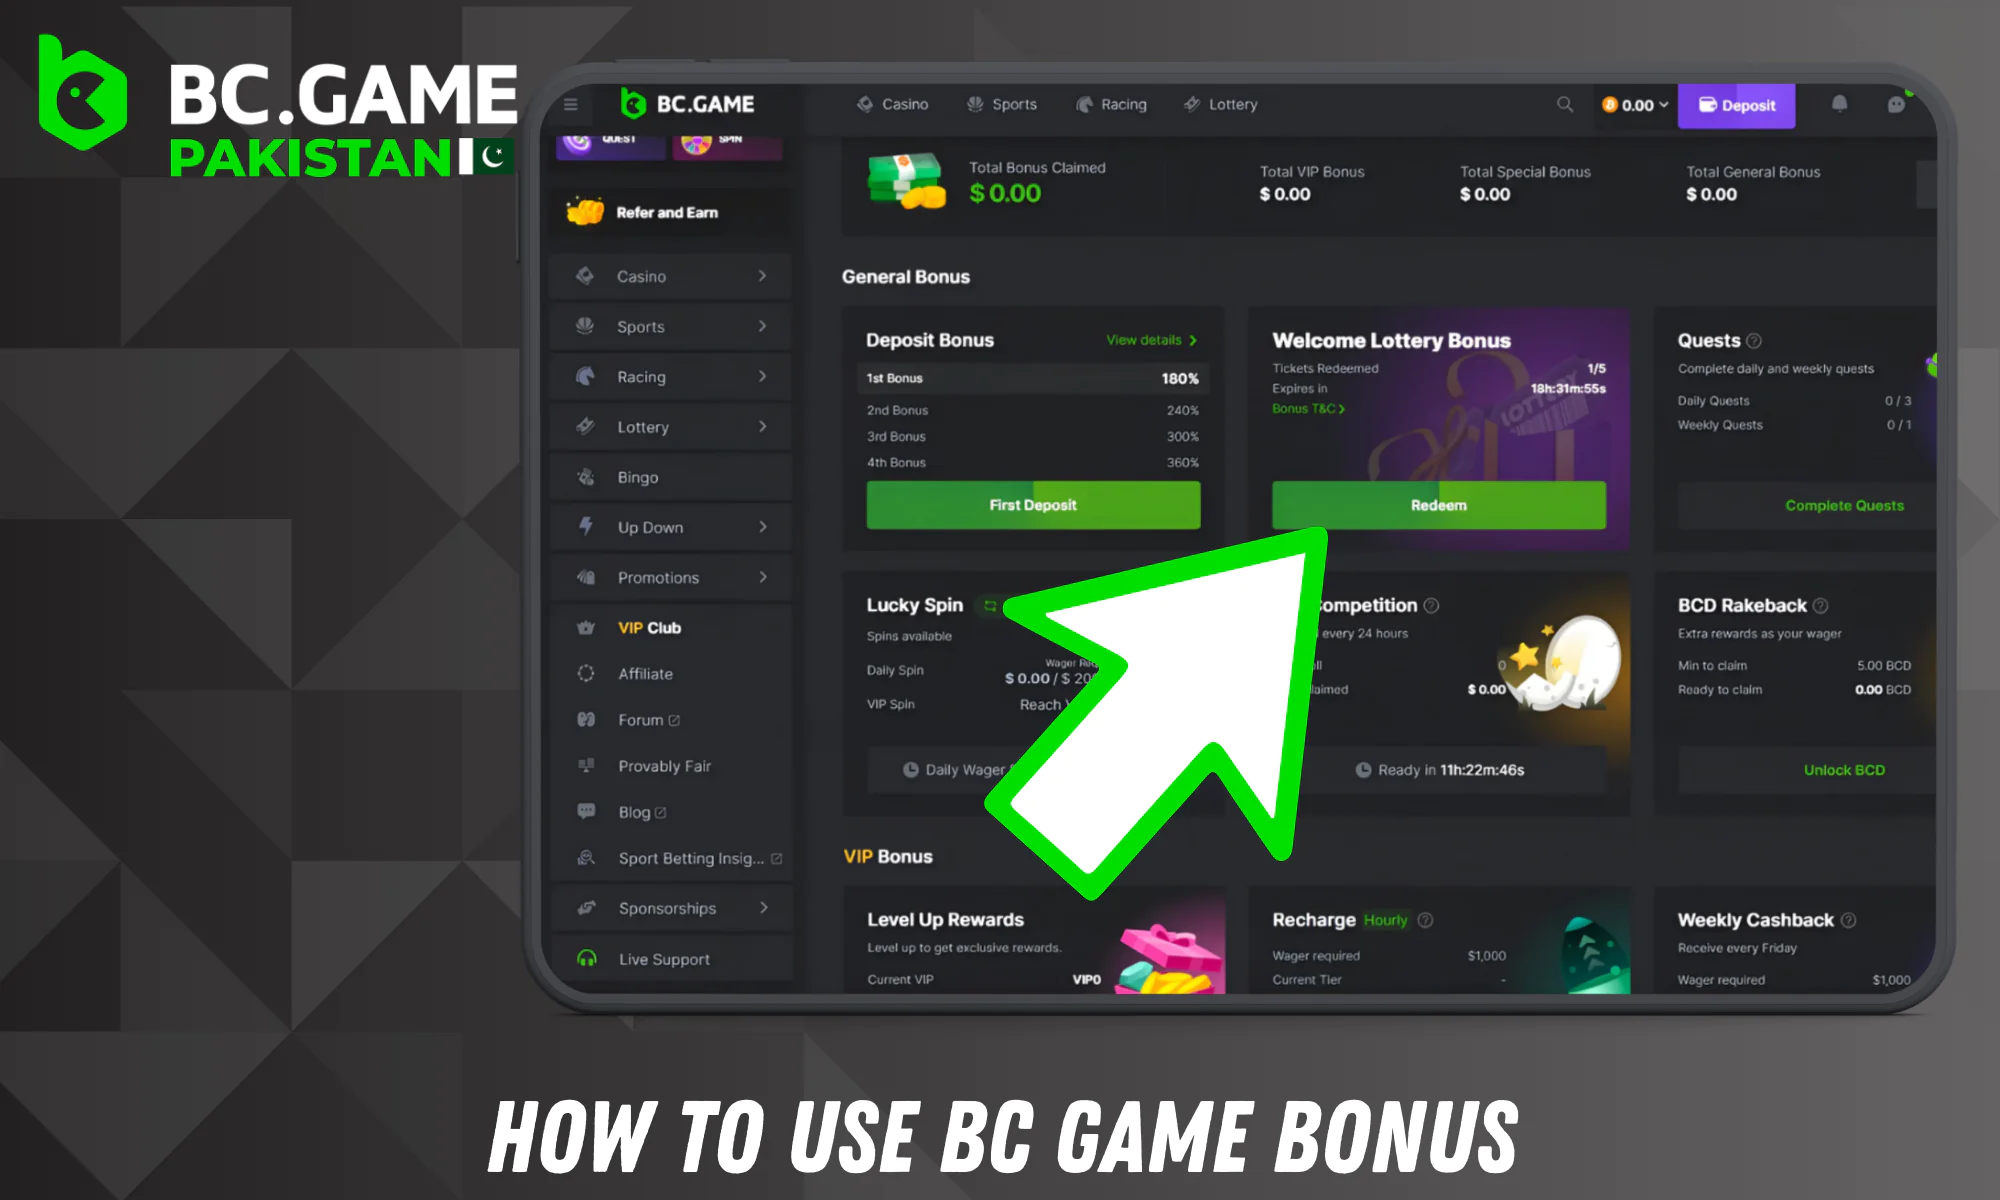 Step-by-step instructions on how to use bonuses in BC Game